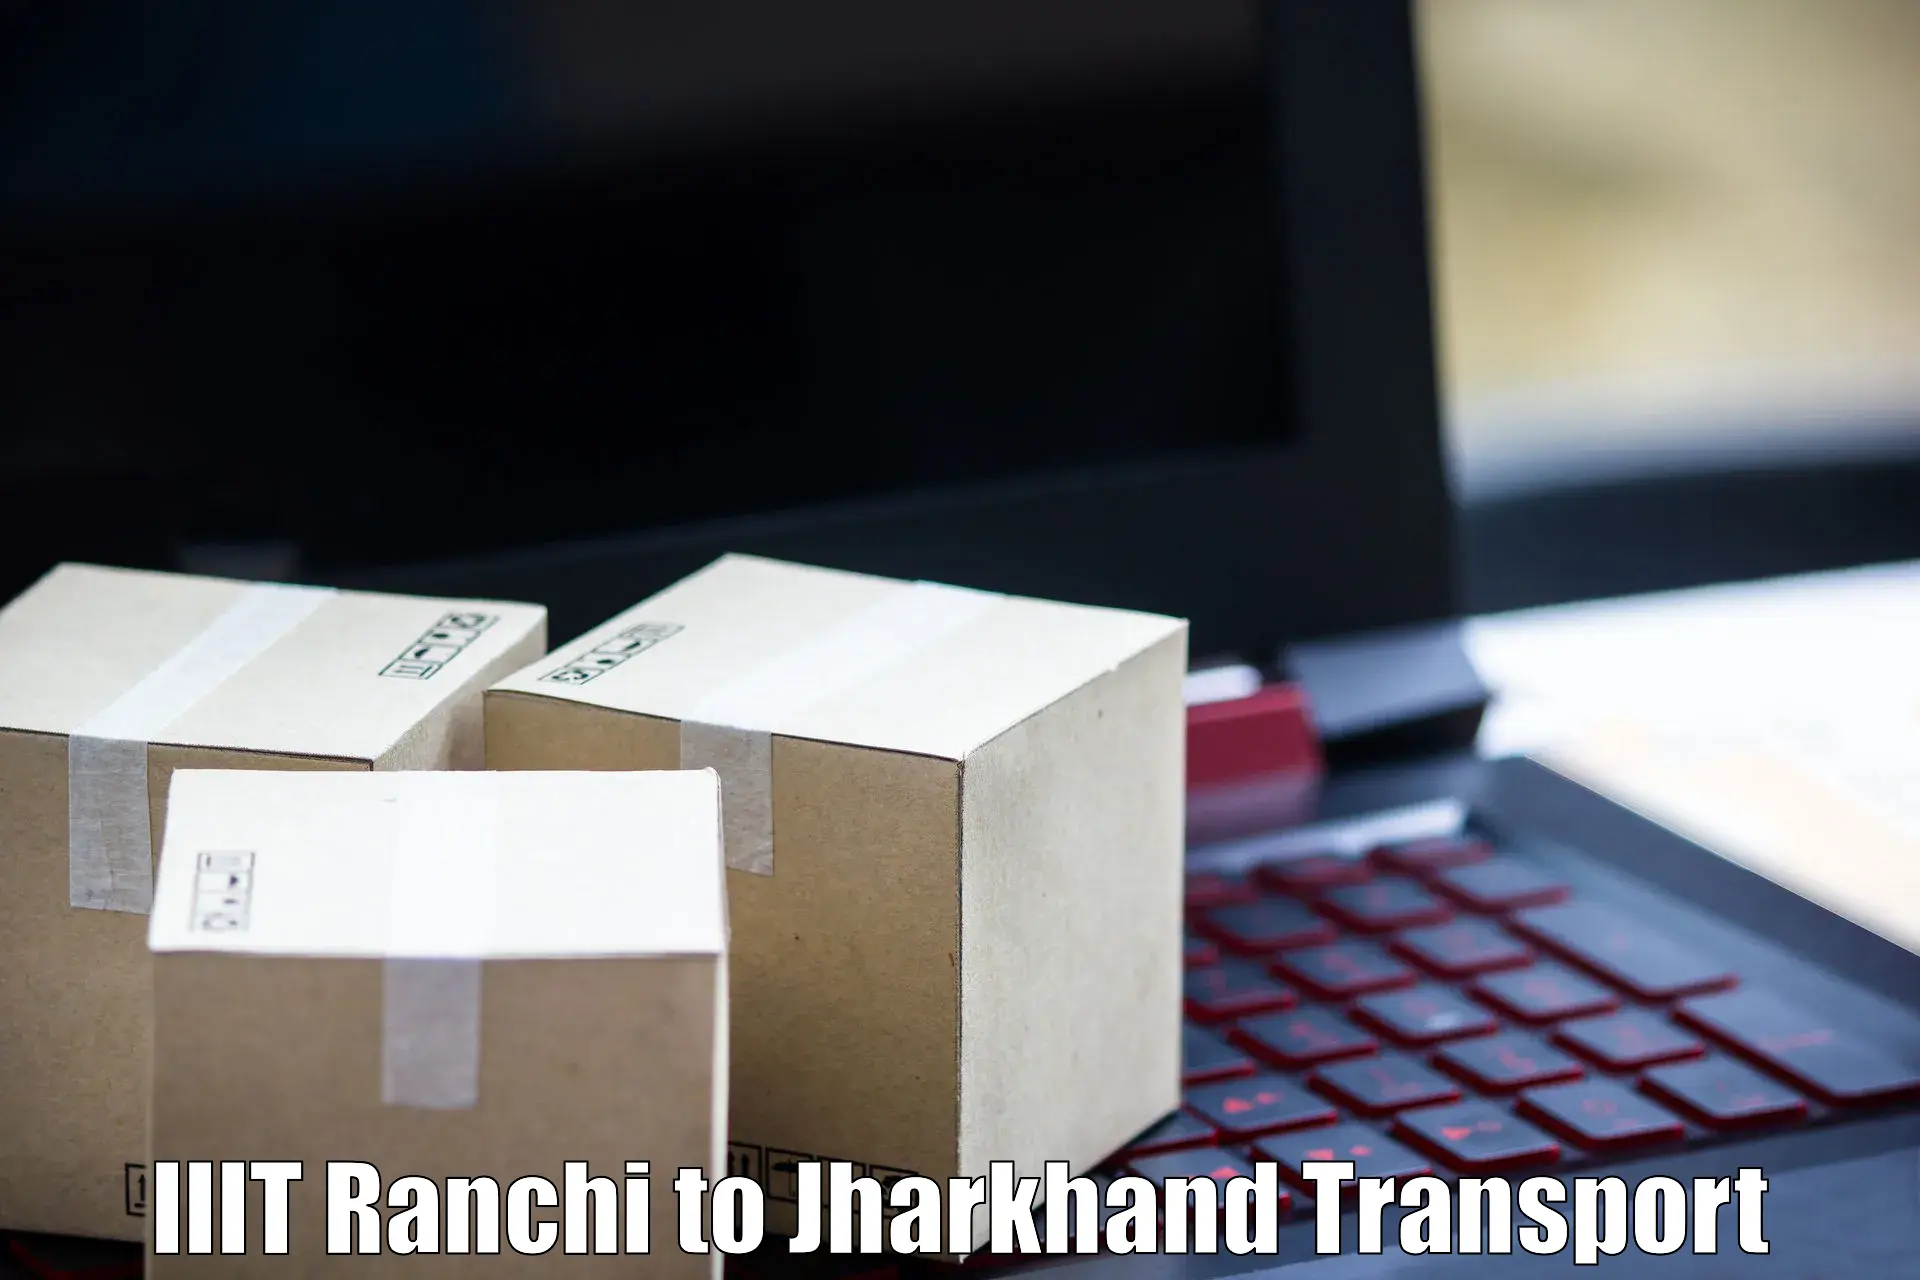 Express transport services IIIT Ranchi to IIT Dhanbad